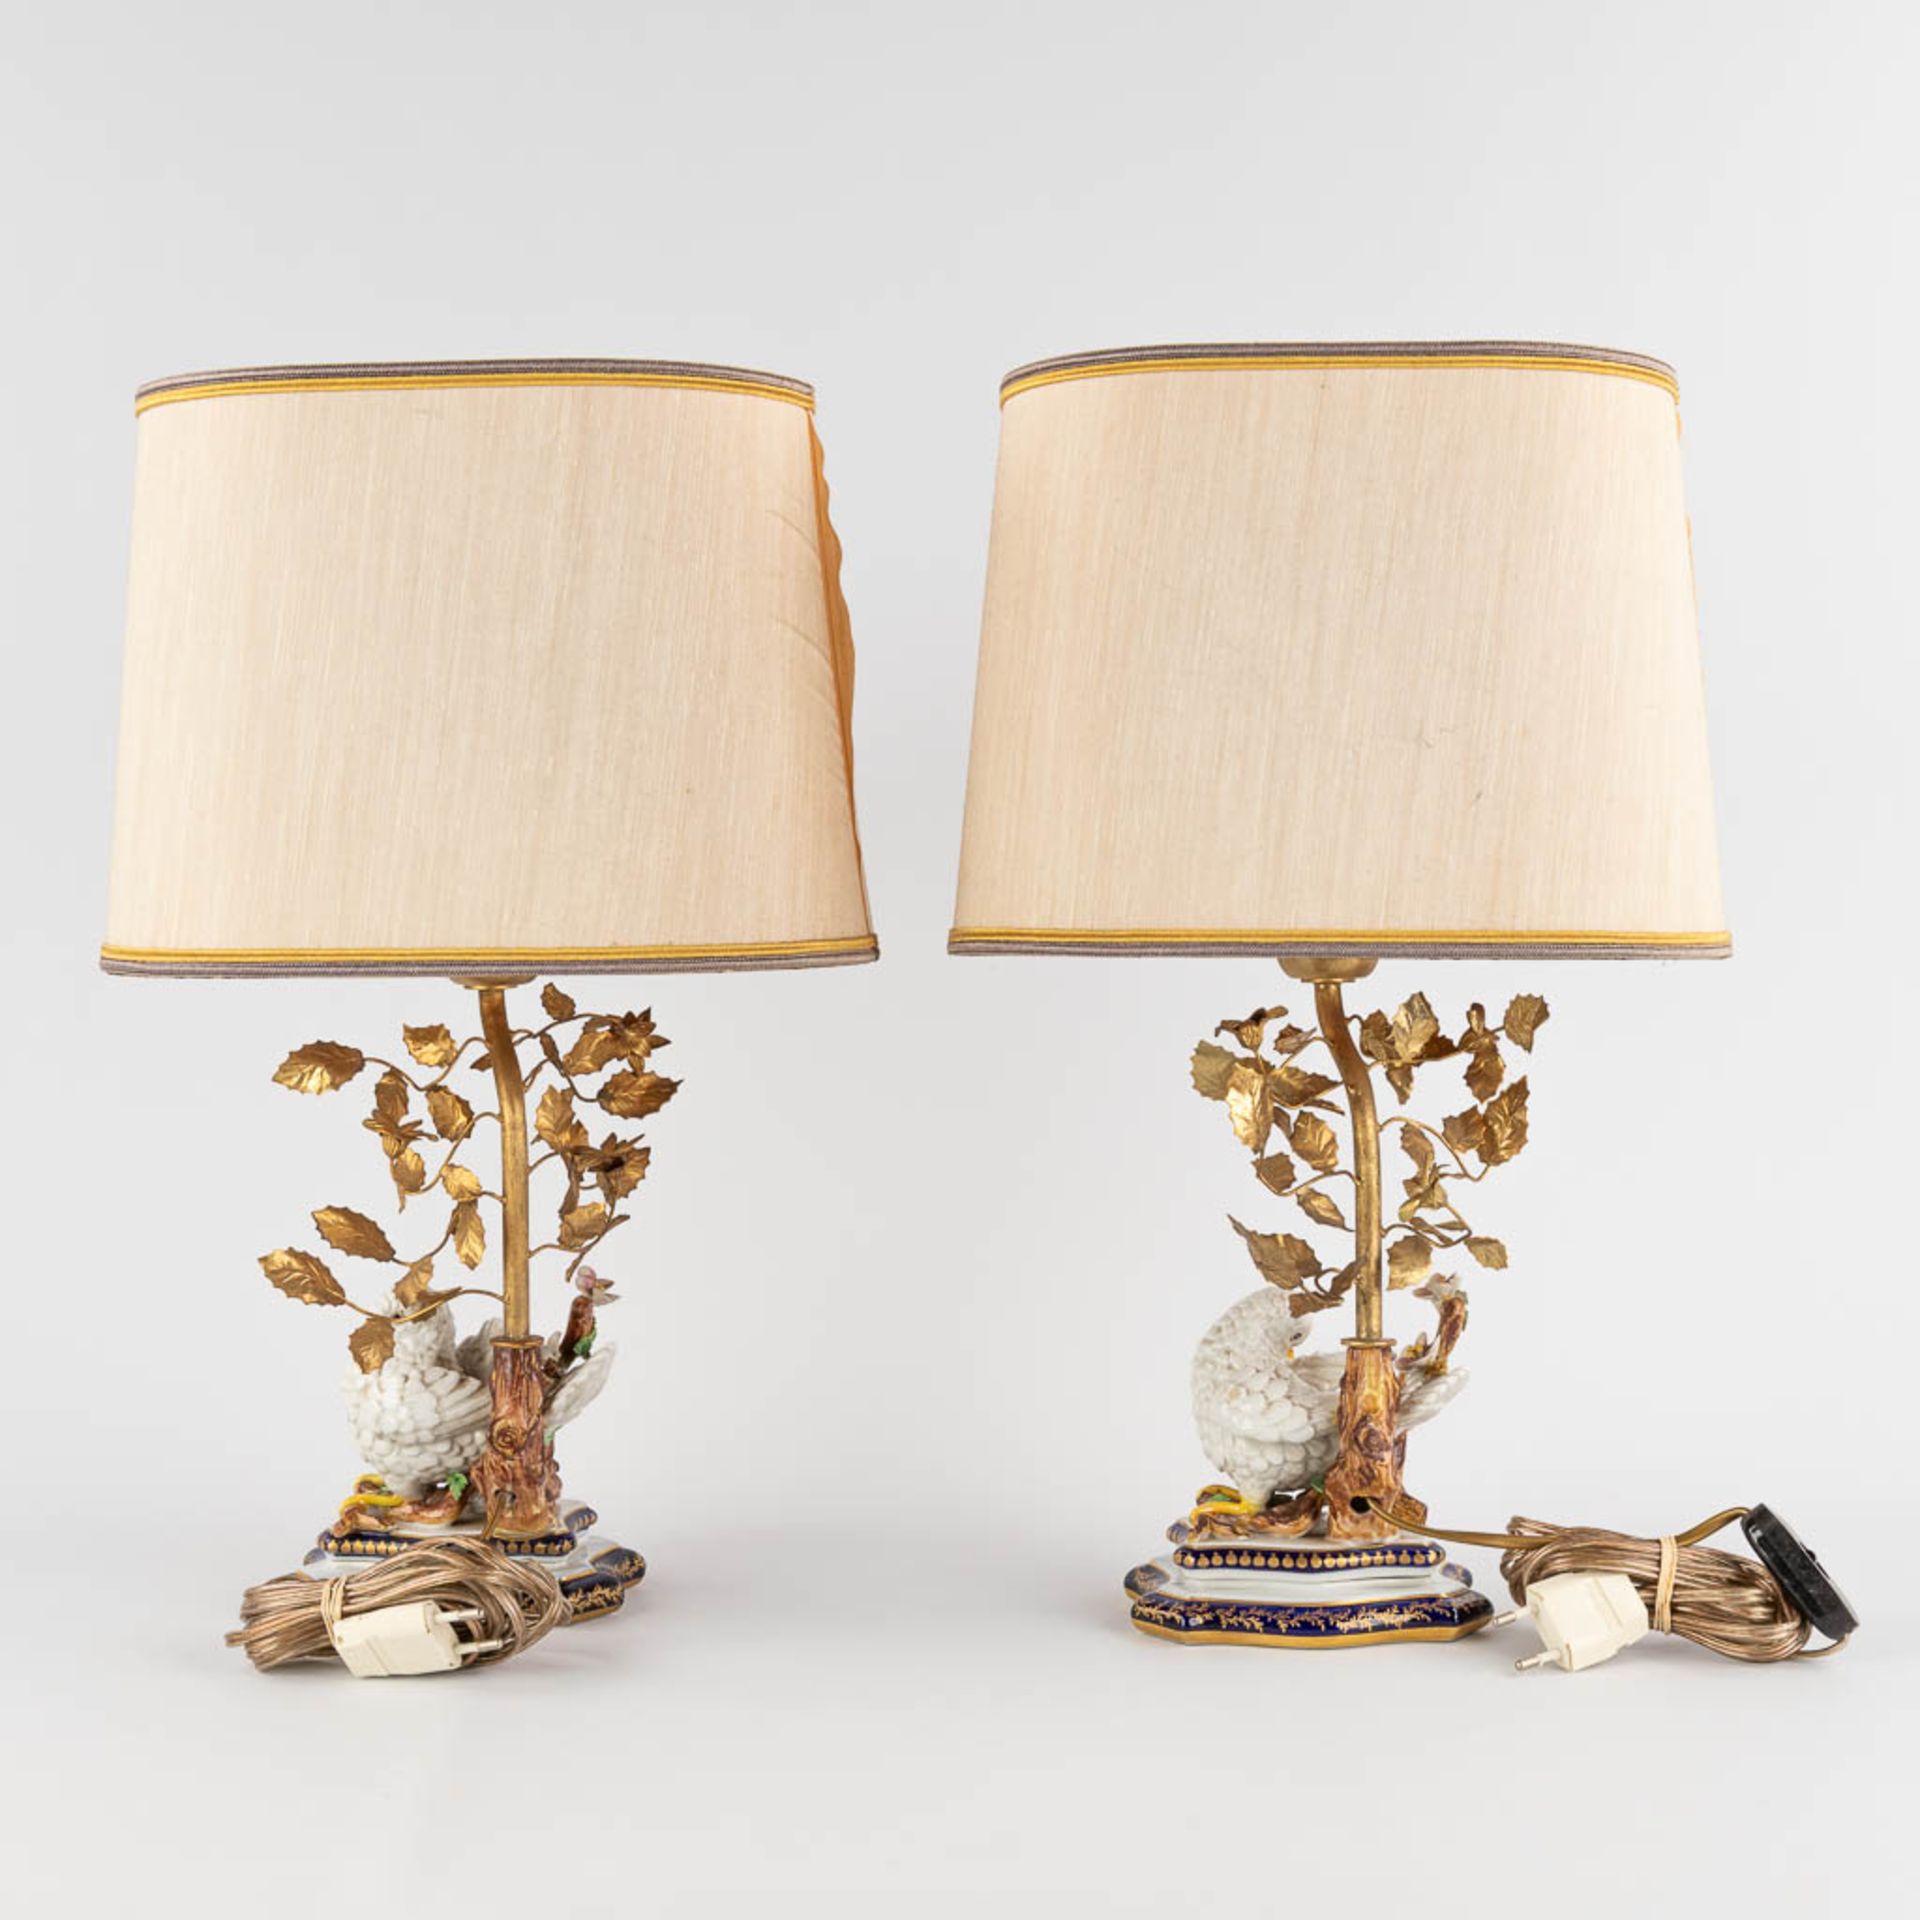 A pair of porcelain and metal table lamps decorated with birds, Sèvres marks. 20th C. (D:12 x W:15 x - Bild 4 aus 11